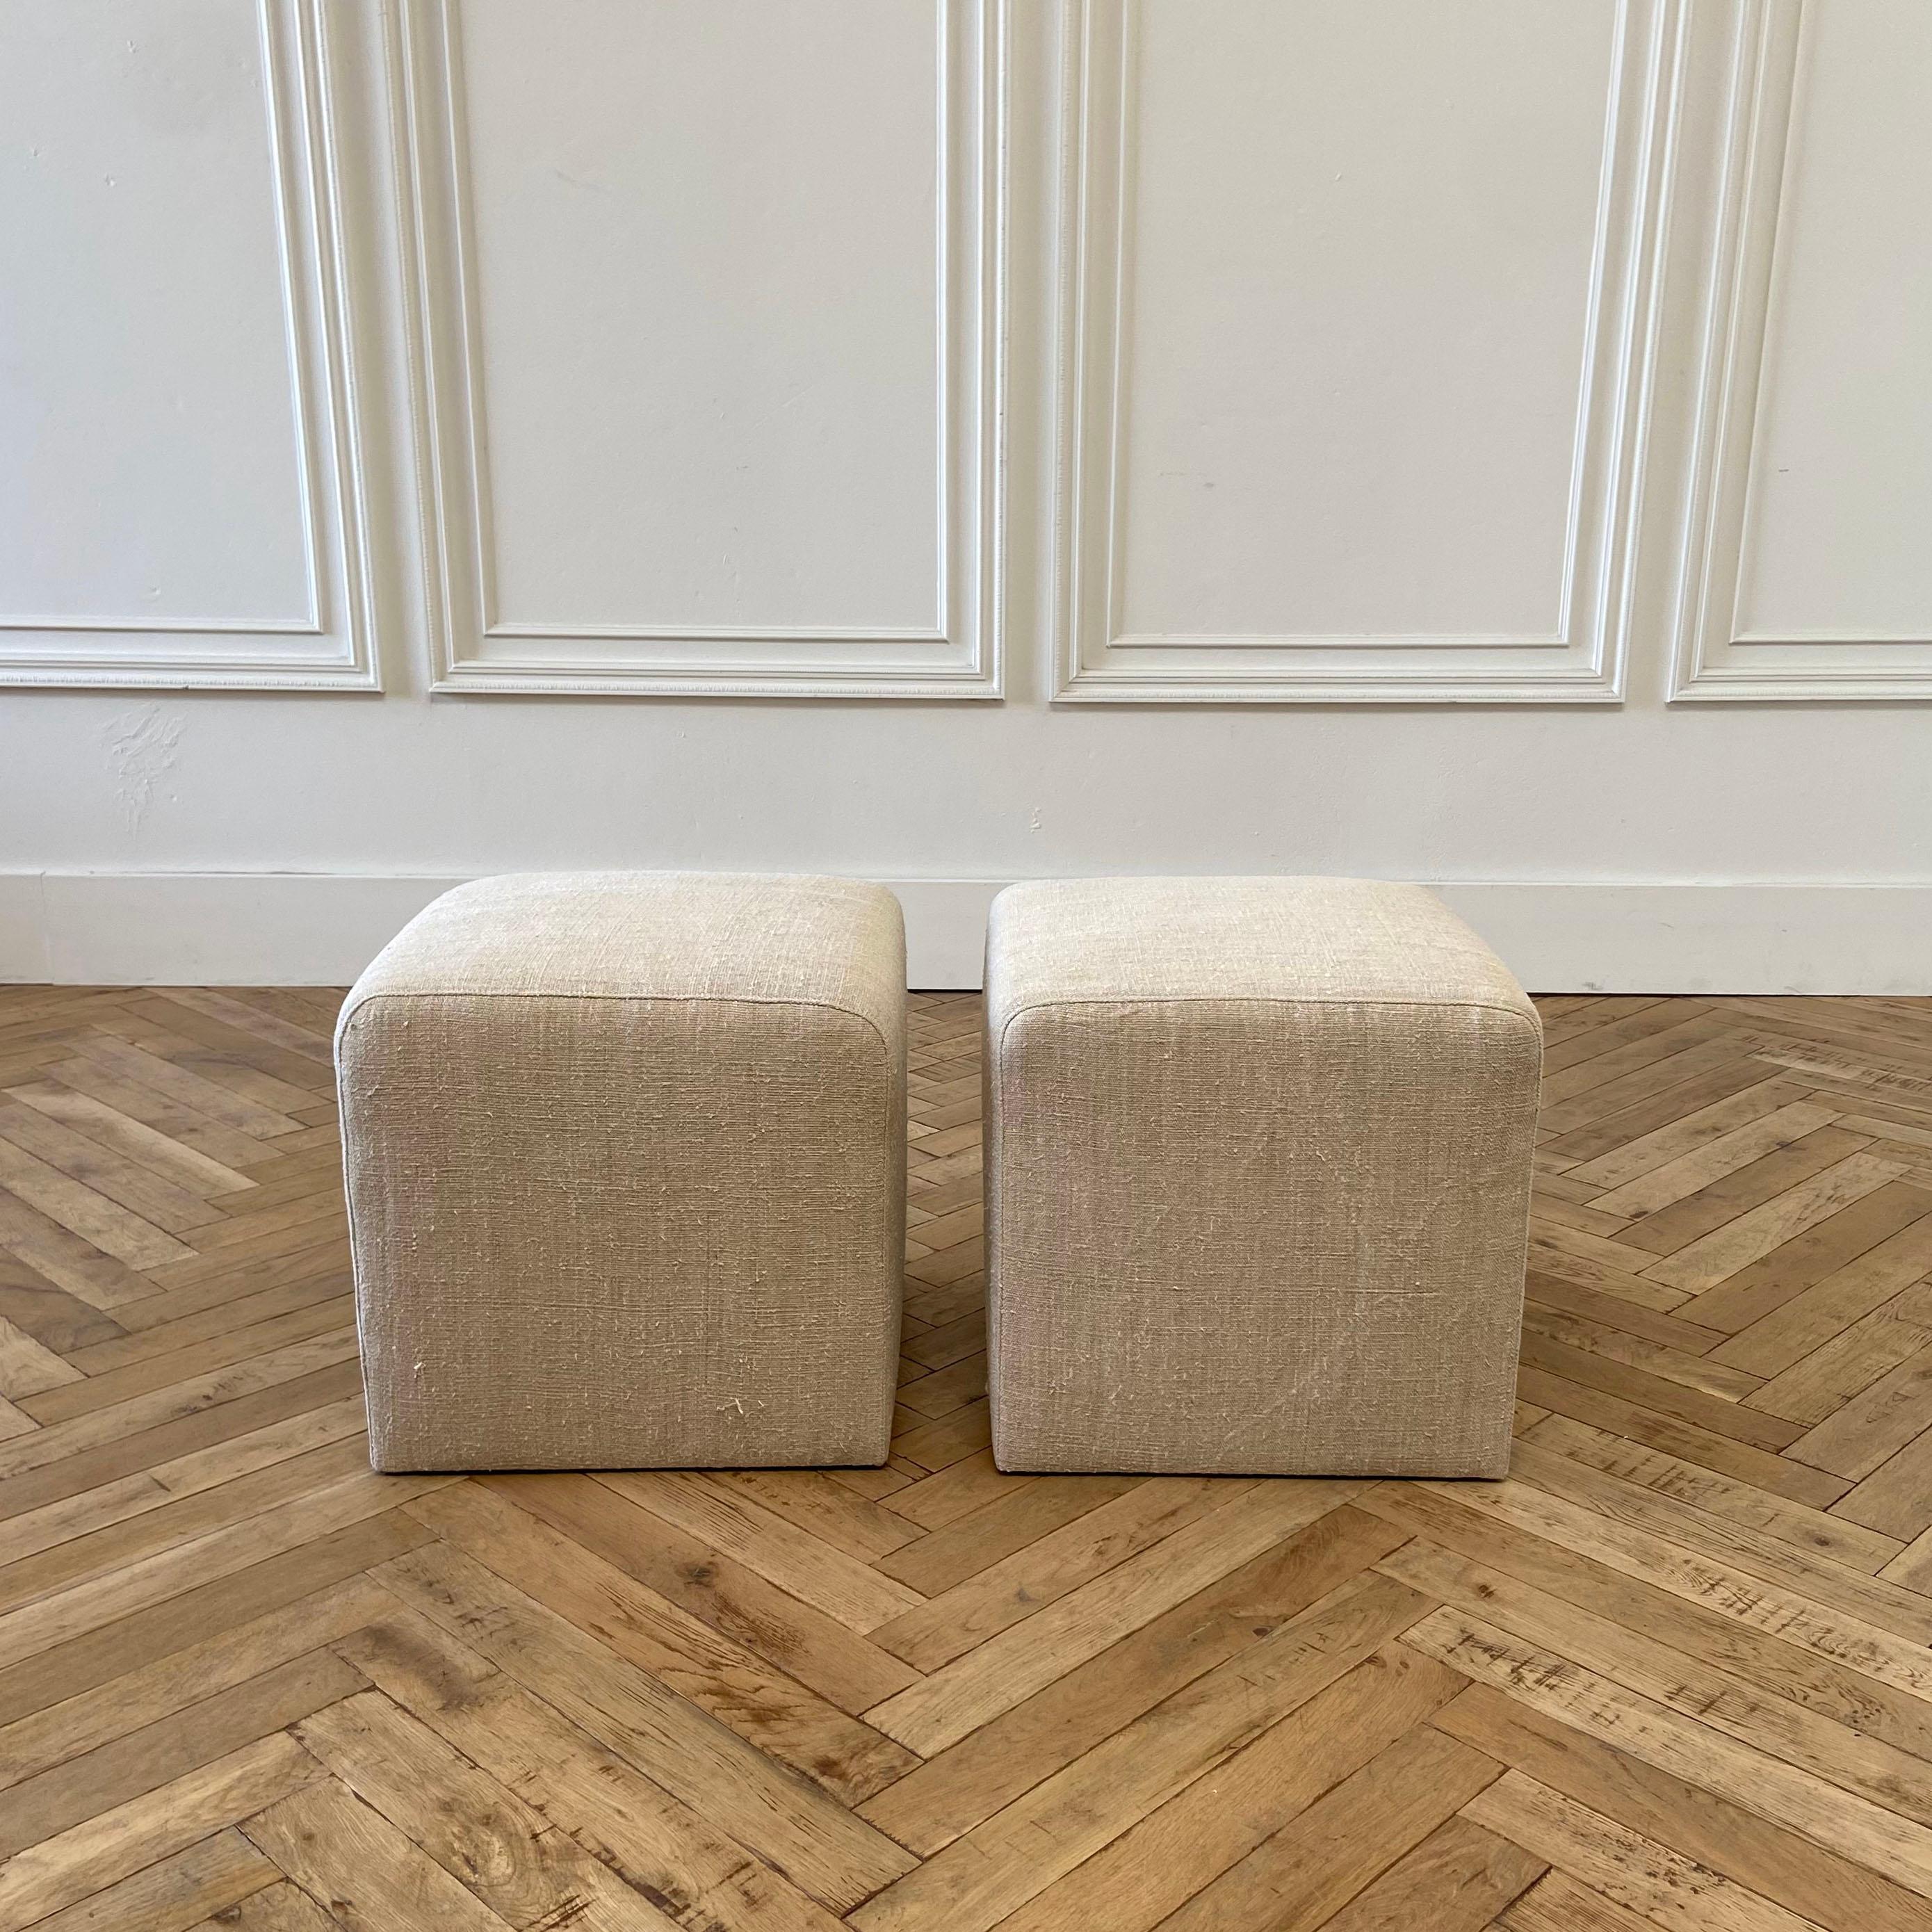 Pair of vintage grain sack upholstered nubby linen cube ottomans
Qty. 2, sold individually
These cubes are custom made by bloom home Inc. and have a wood frame construction, high density quality foam. The material is antique or vintage European